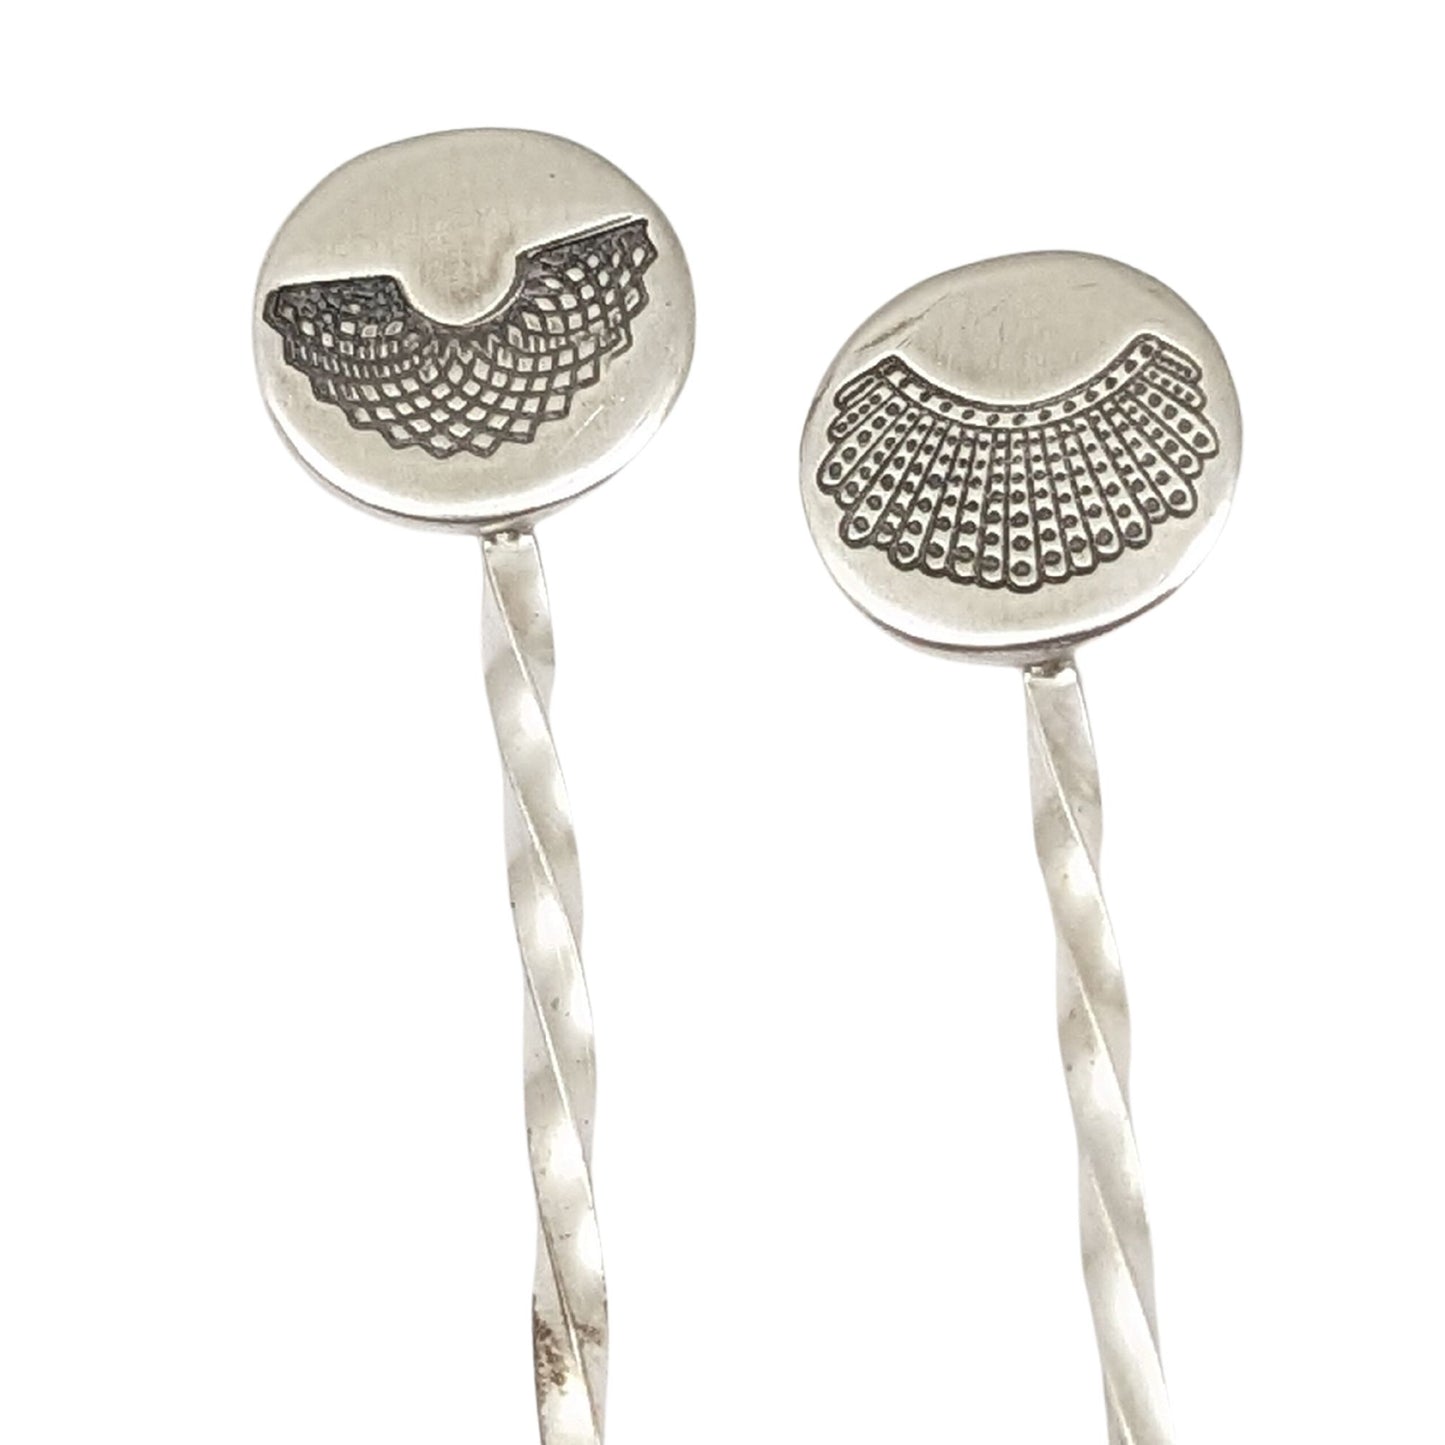 Sterling silver cocktail pick with decorative element on top. One has a round disc with stamping of RBGs Favorite collar, the other of RGB's Dissent Collar